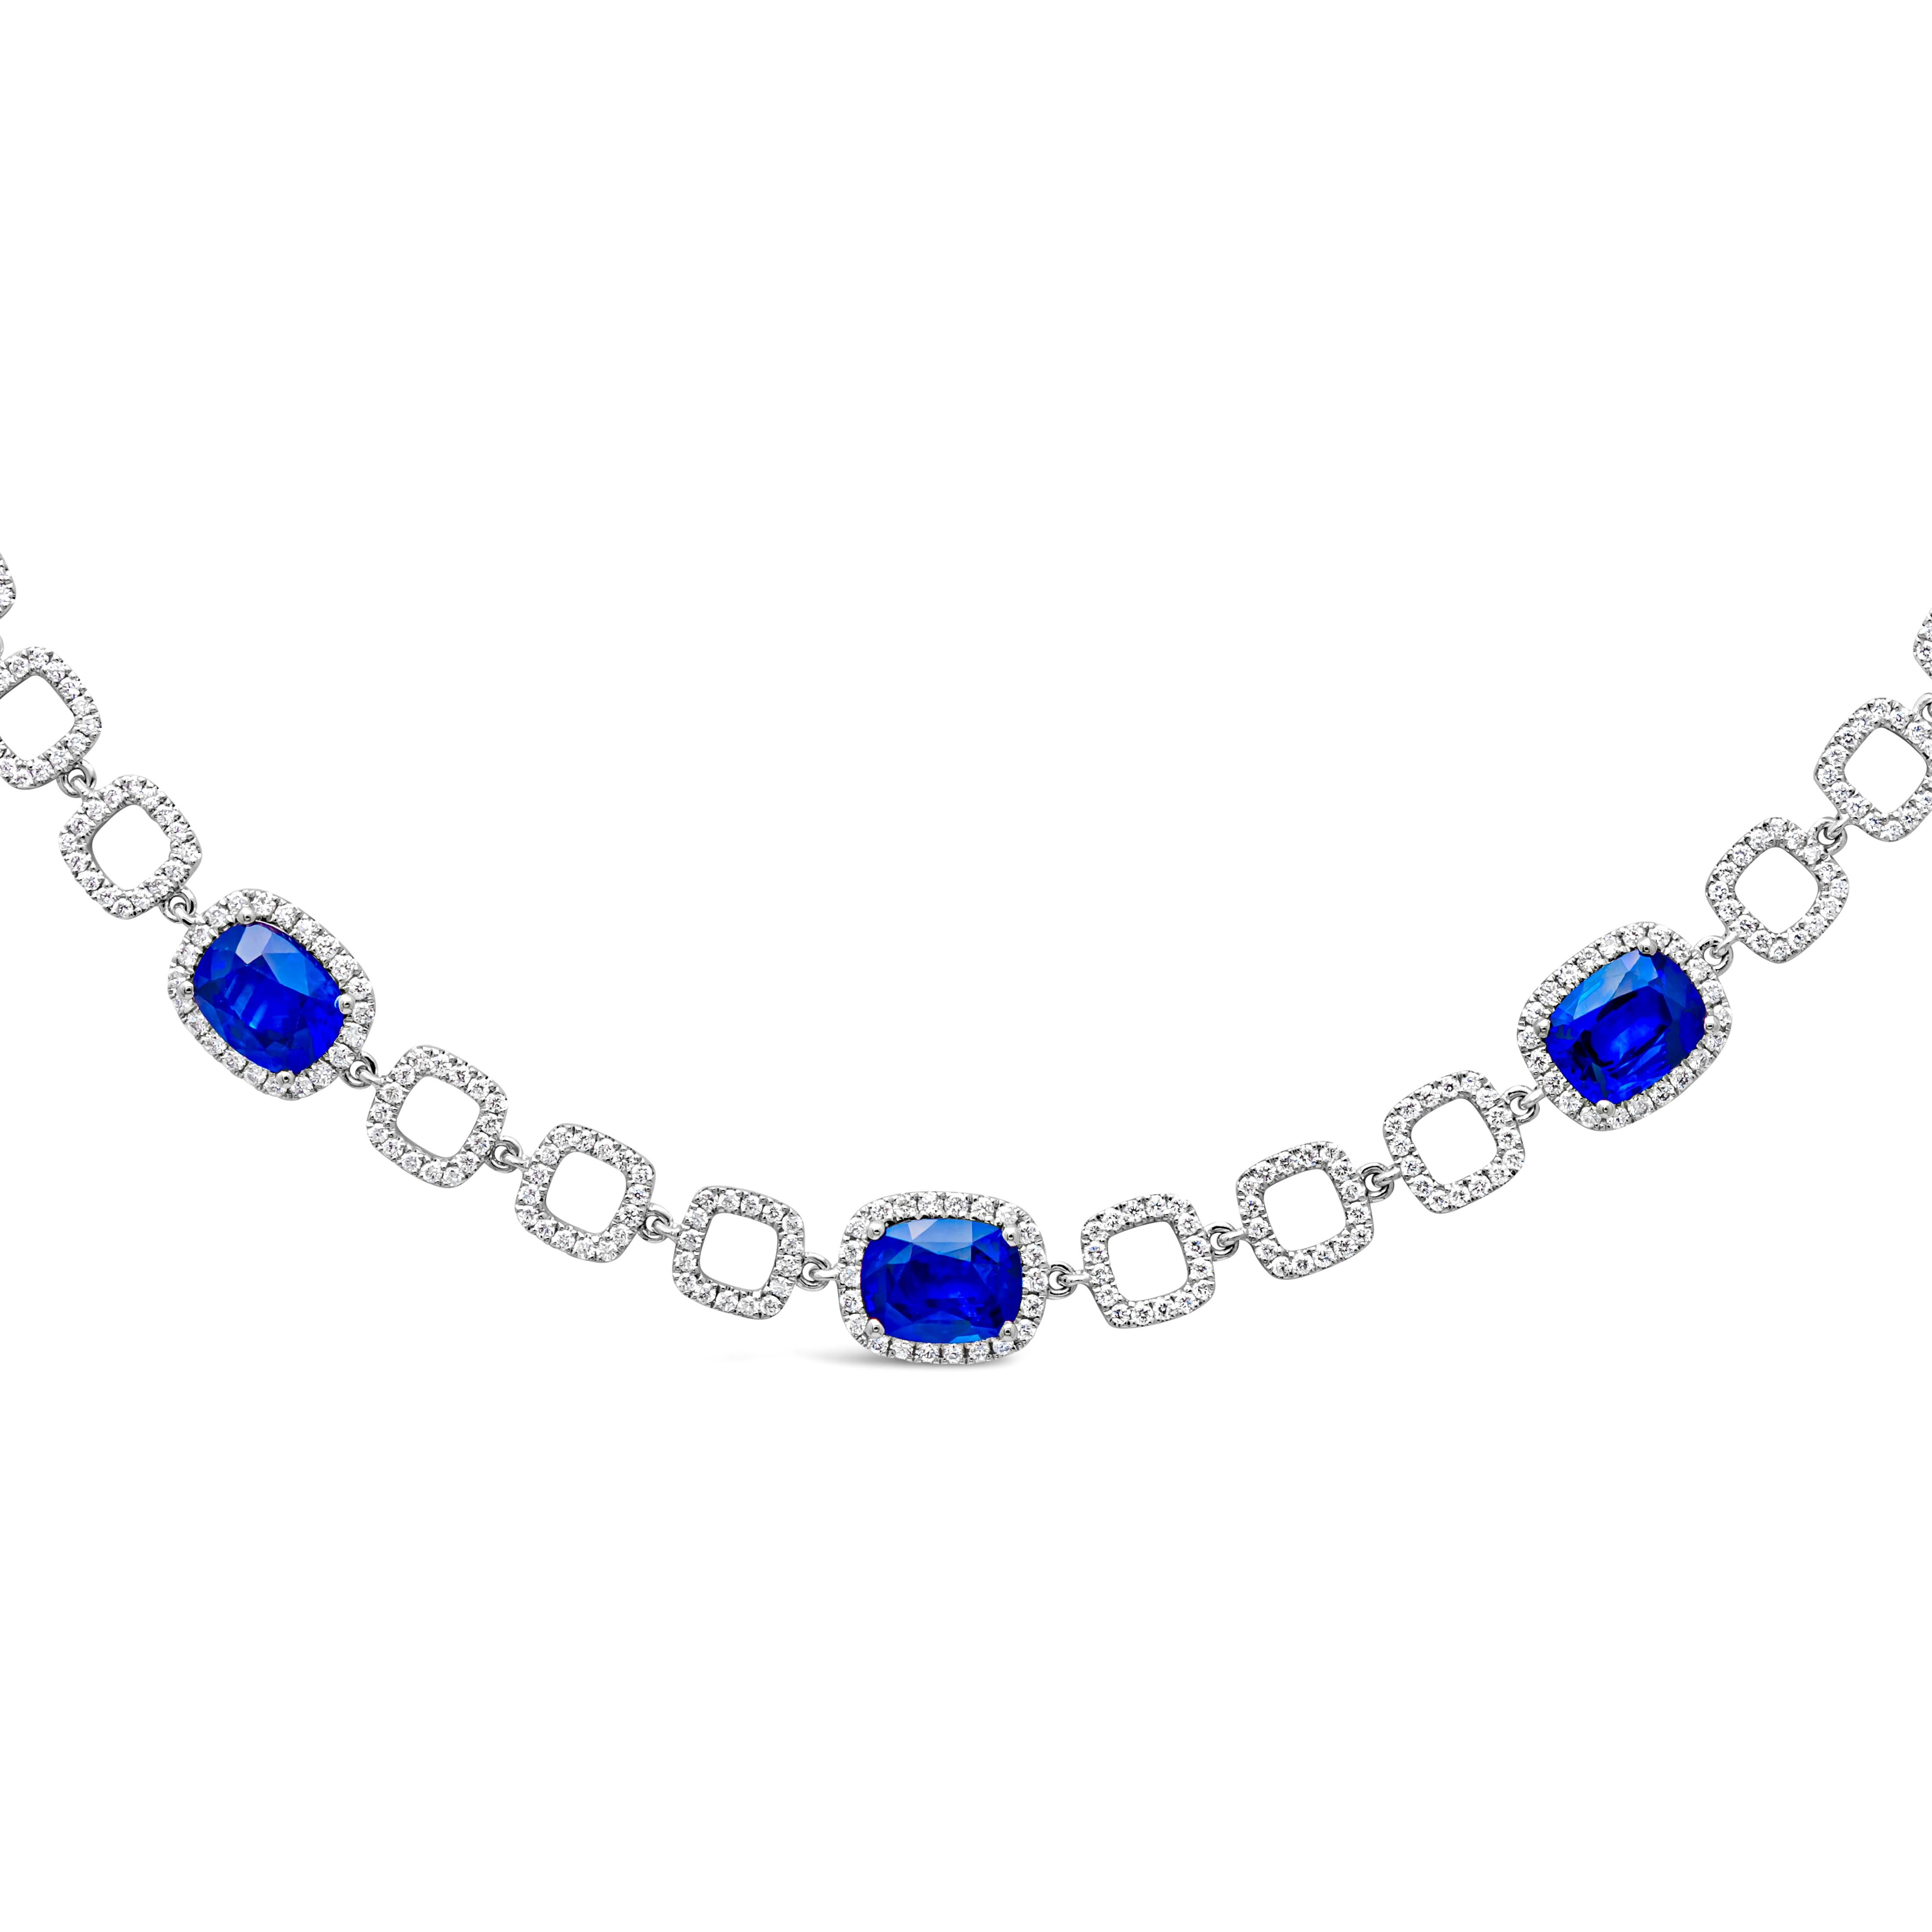 A fashionable and stunning tennis line pendant necklace showcasing a color-rich 7 cushion cut blue sapphires weighing 7.975 carats total, set in a classic four prong basket setting and surrounded by brilliant round cut melee diamonds in a halo